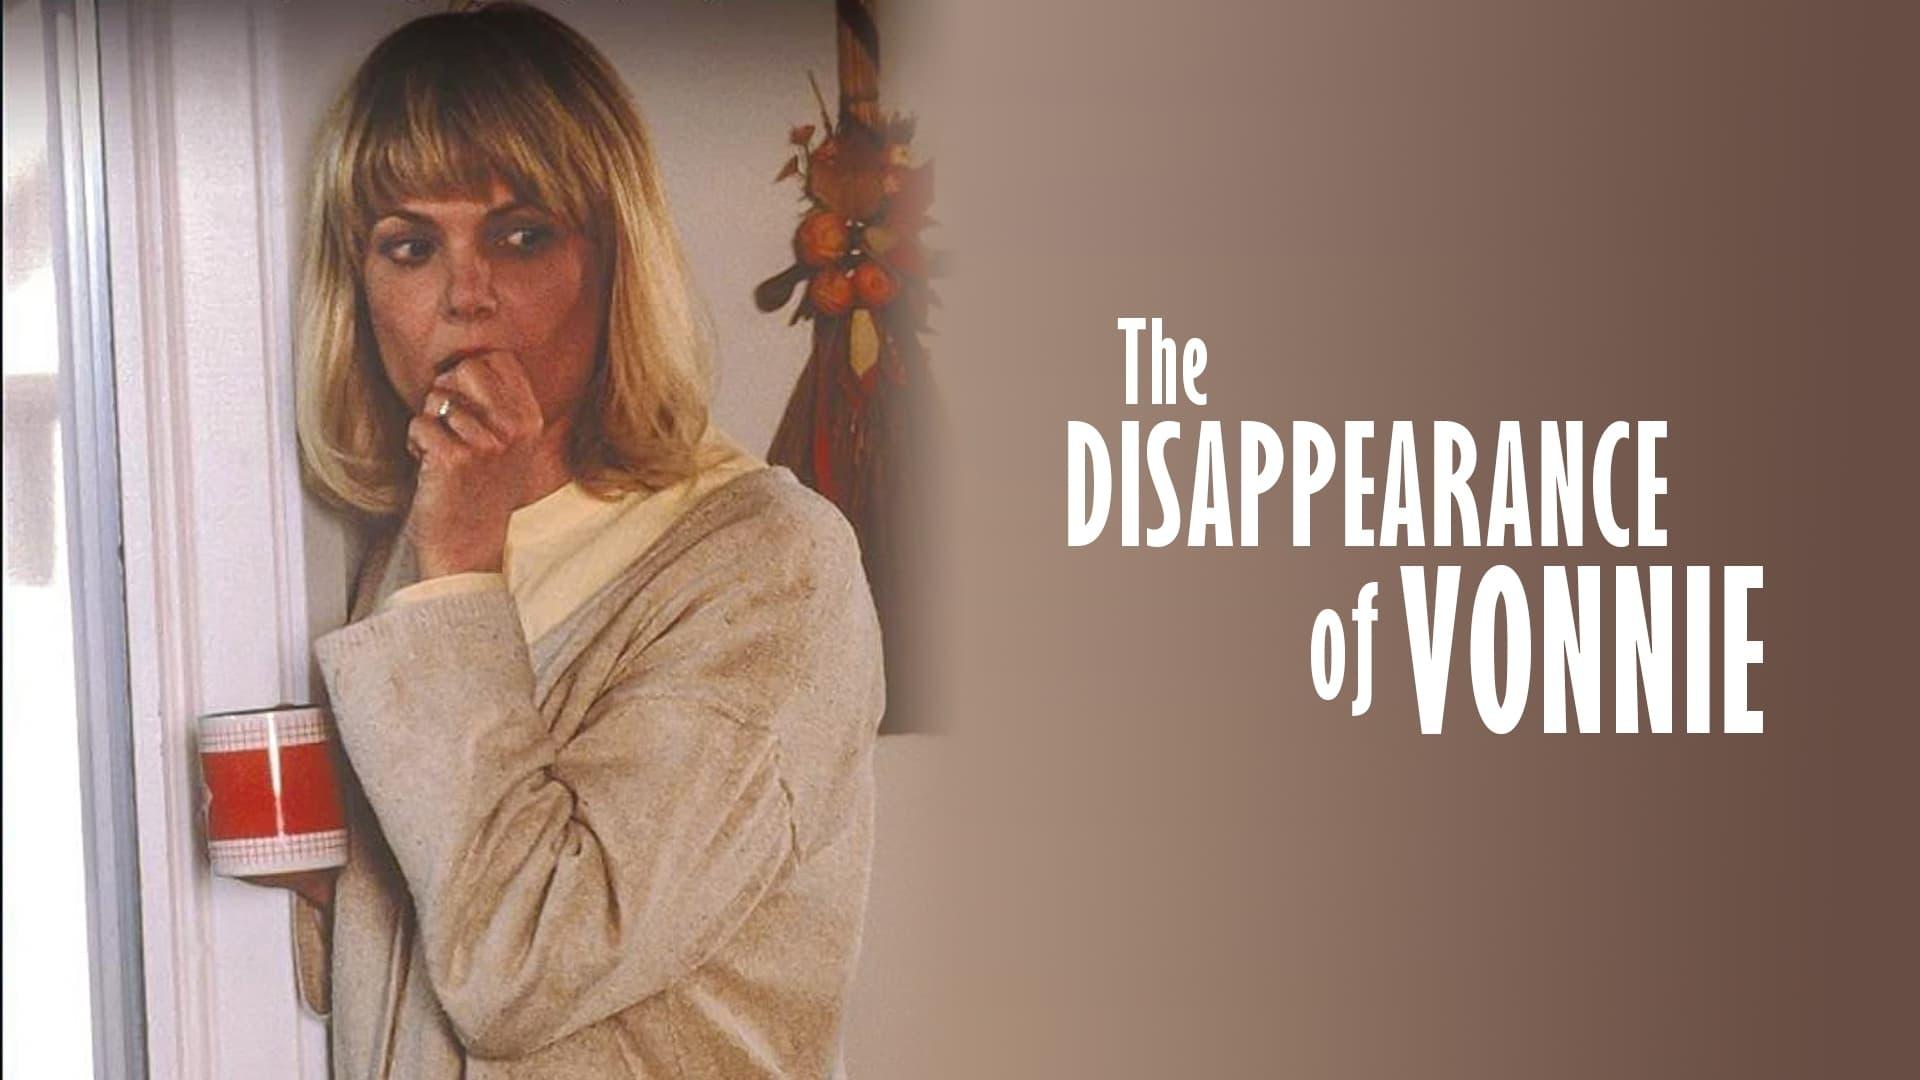 The Disappearance of Vonnie backdrop